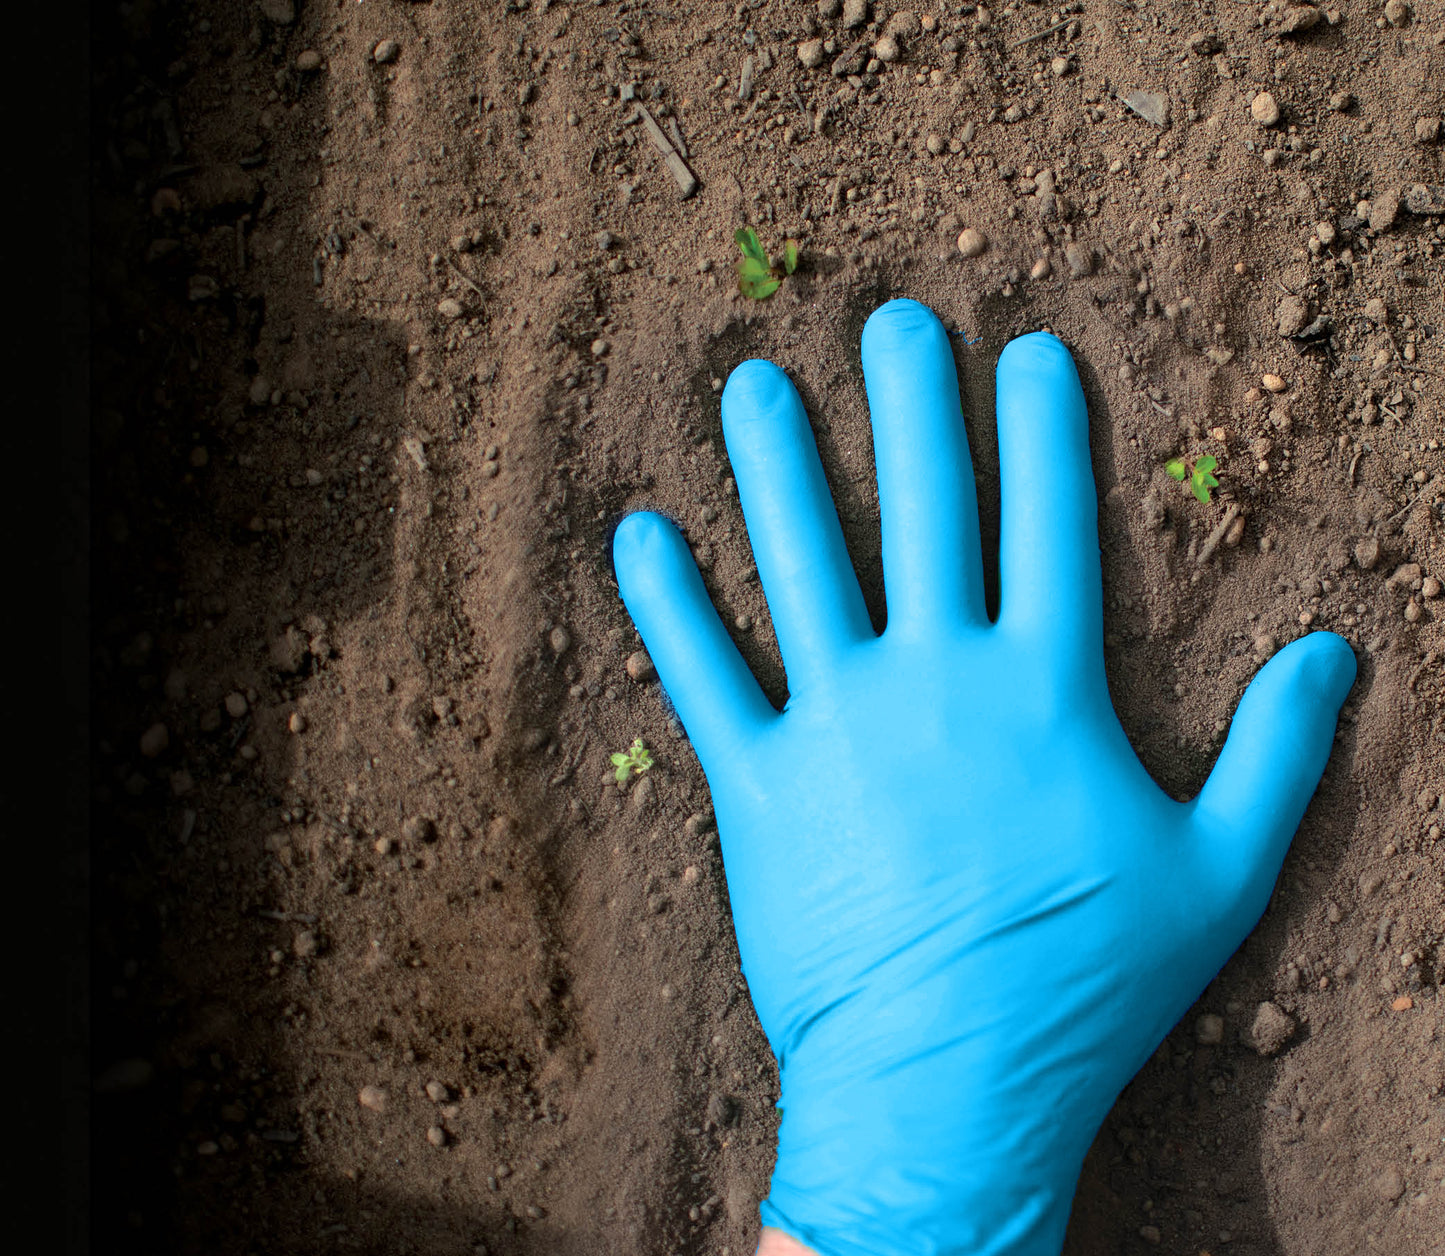 These GreenCircle® Certified Showa® 7500PF Single-Use Powder-Free Latex-Free 4-mil Blue Nitrile Gloves with EBT (Eco-Best Technology®) accelerated biodegradation decomposes 82% in 386 days.